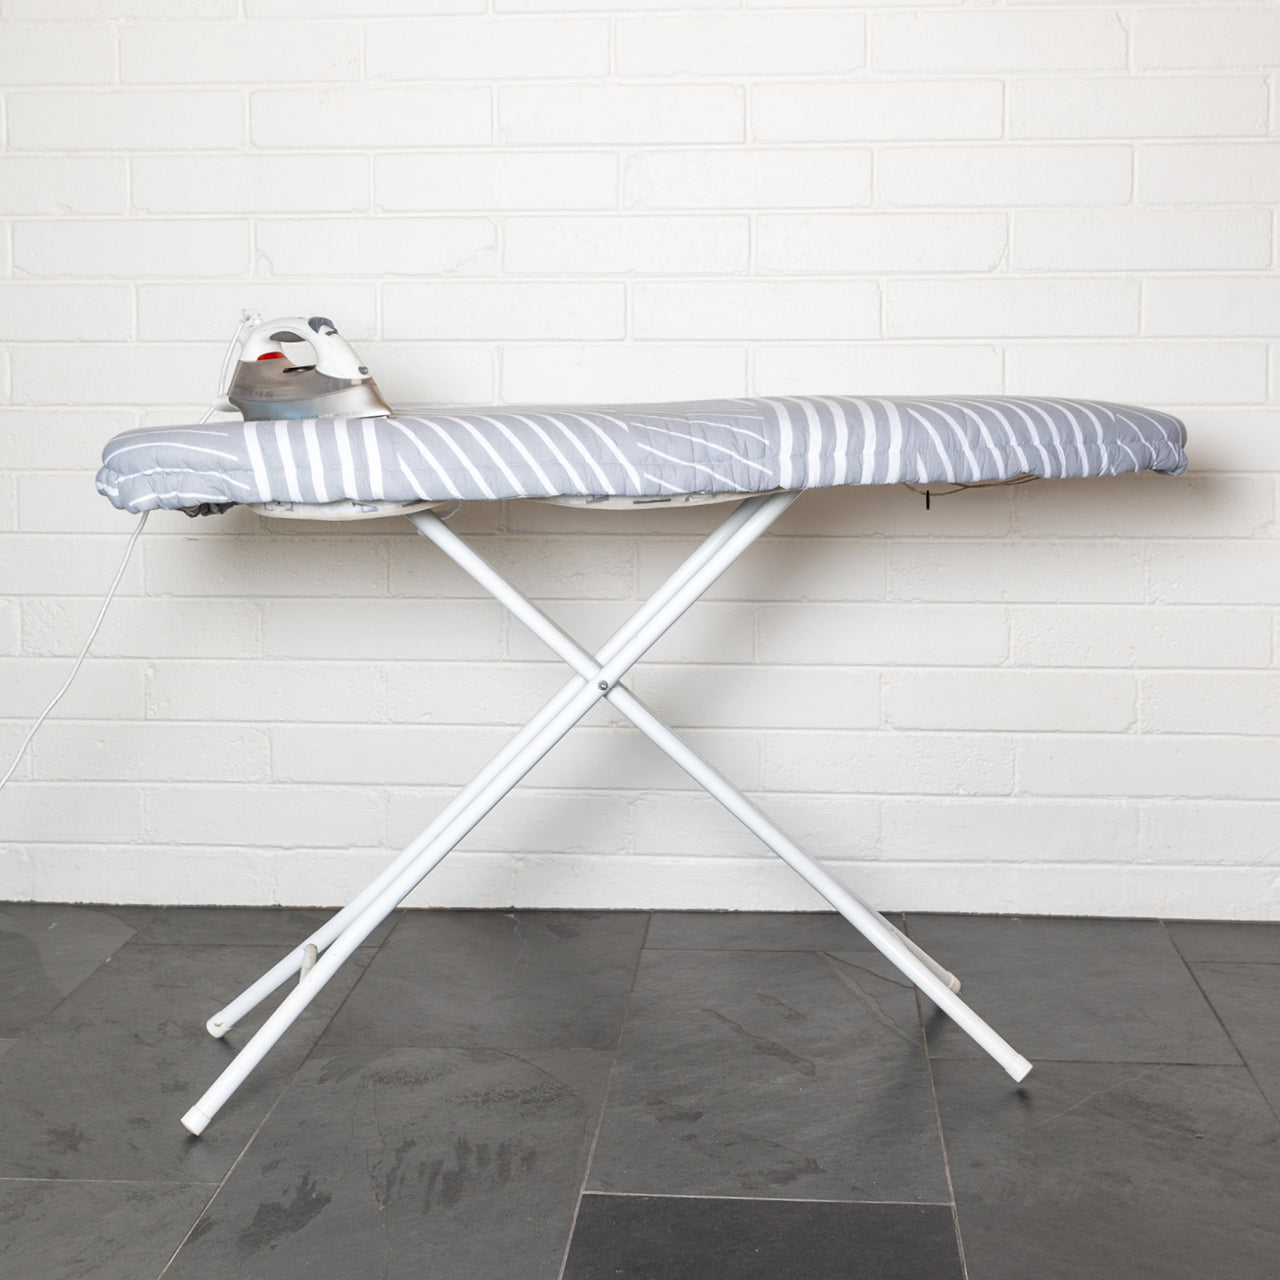 Ironing Board Cover on ironing board standing up with iron